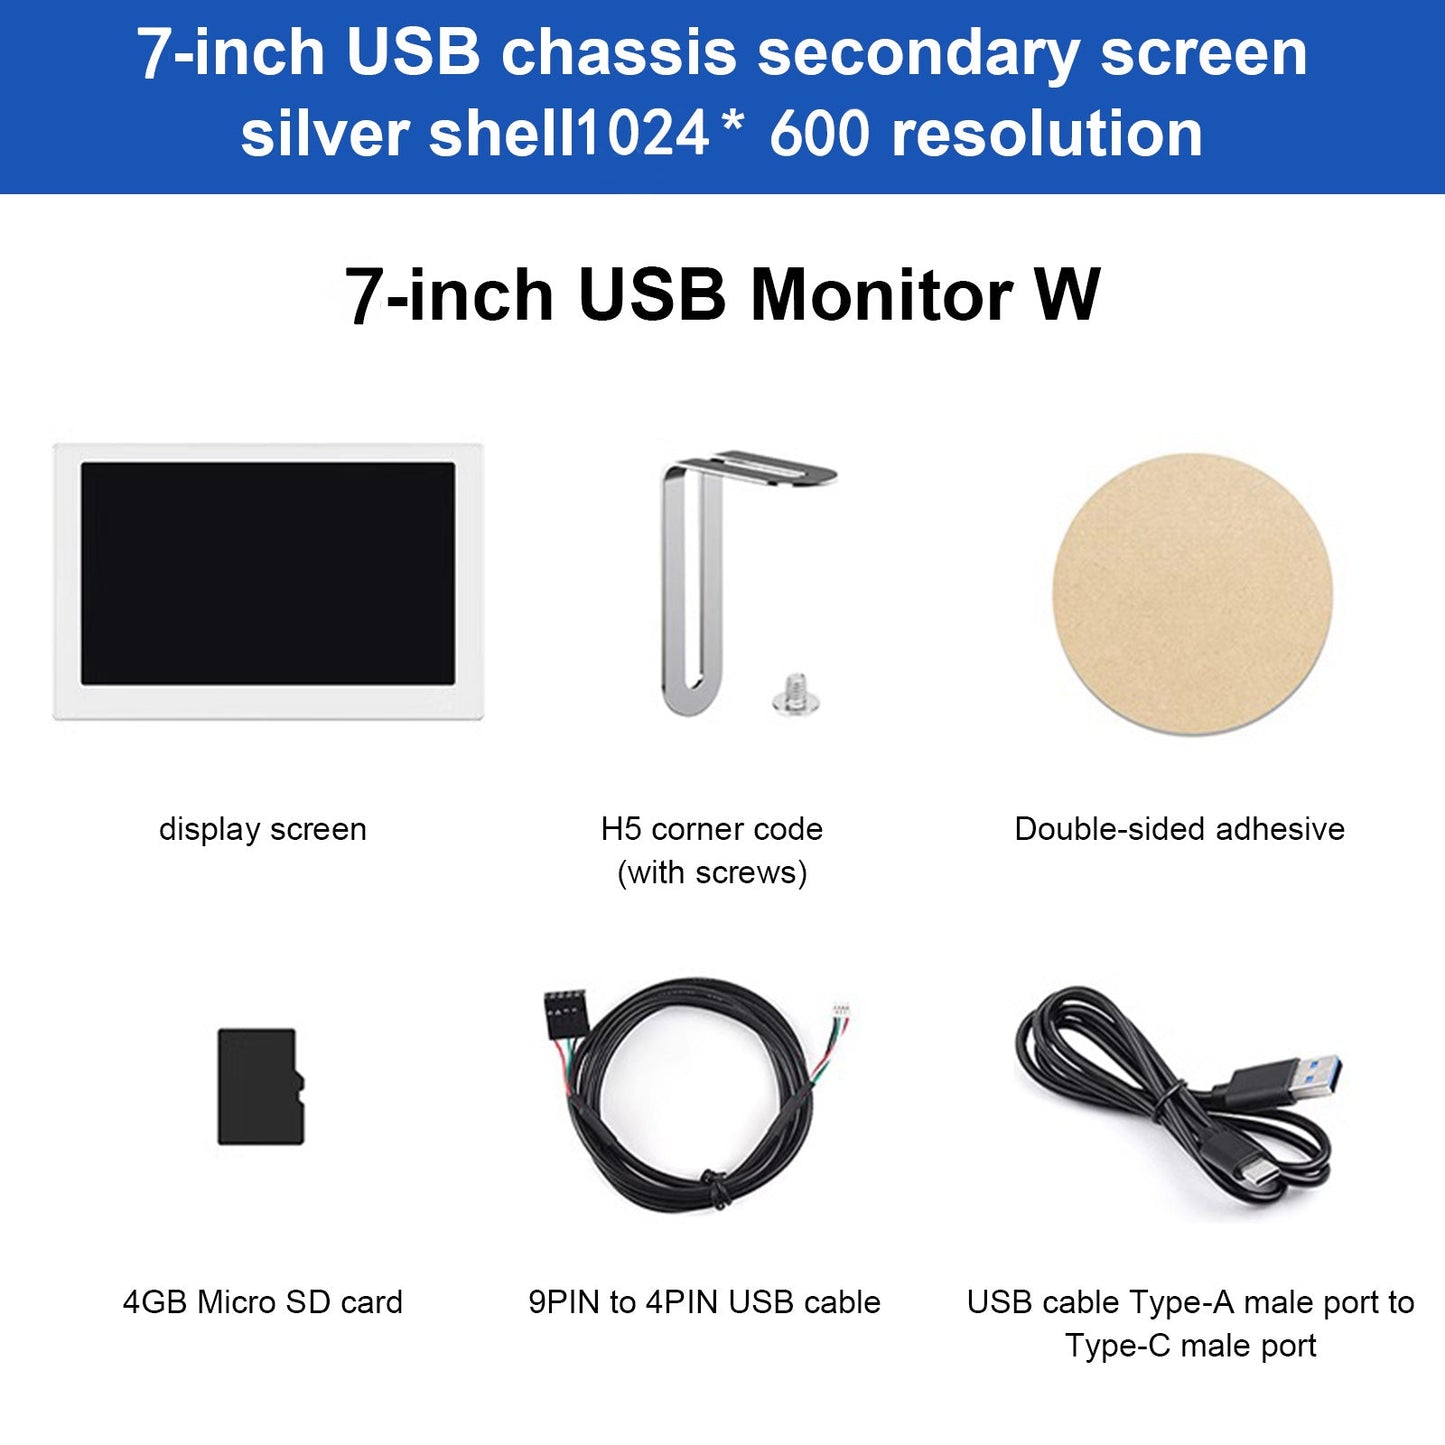 5/7-inch USB Computer Case Secondary Screen IPS Table-Mounted Atmosphere Screen